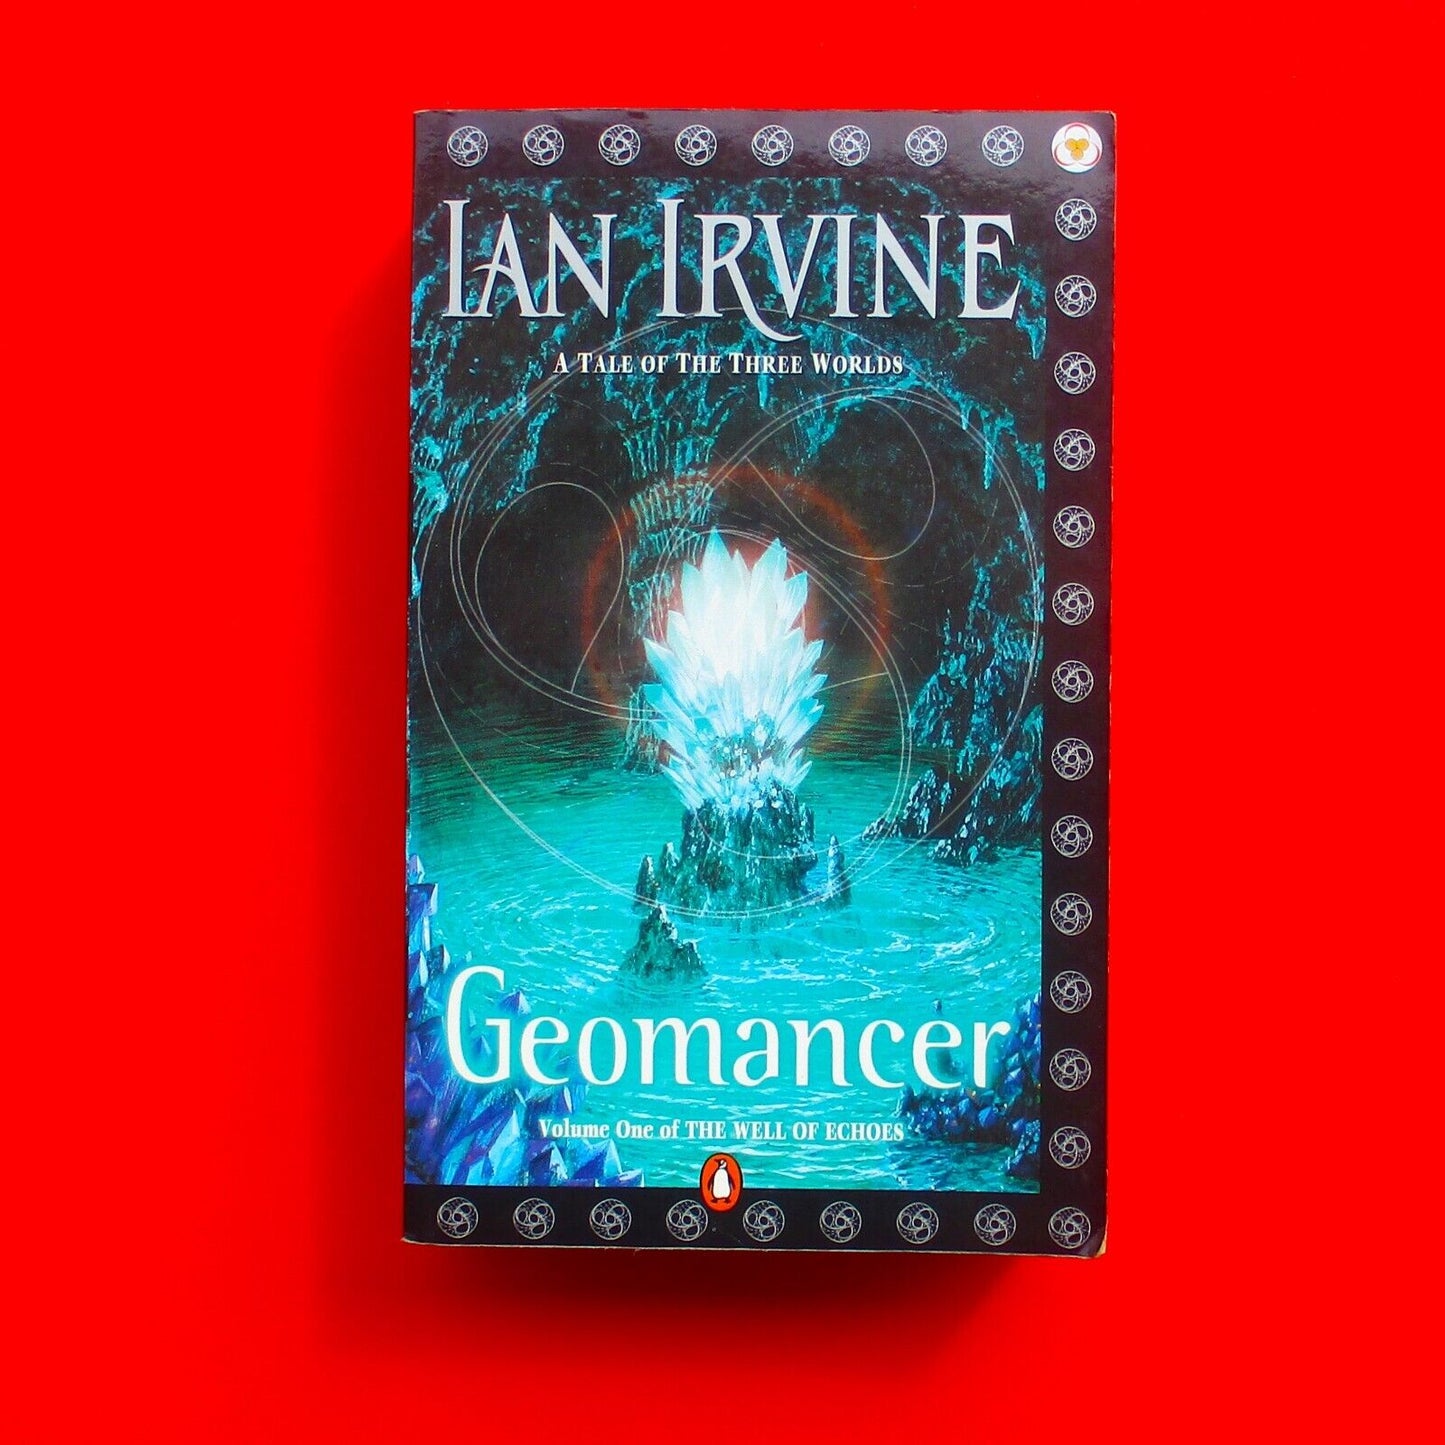 Geomancer by Ian Irvine Well of Echoes Book One Penguin Paperback